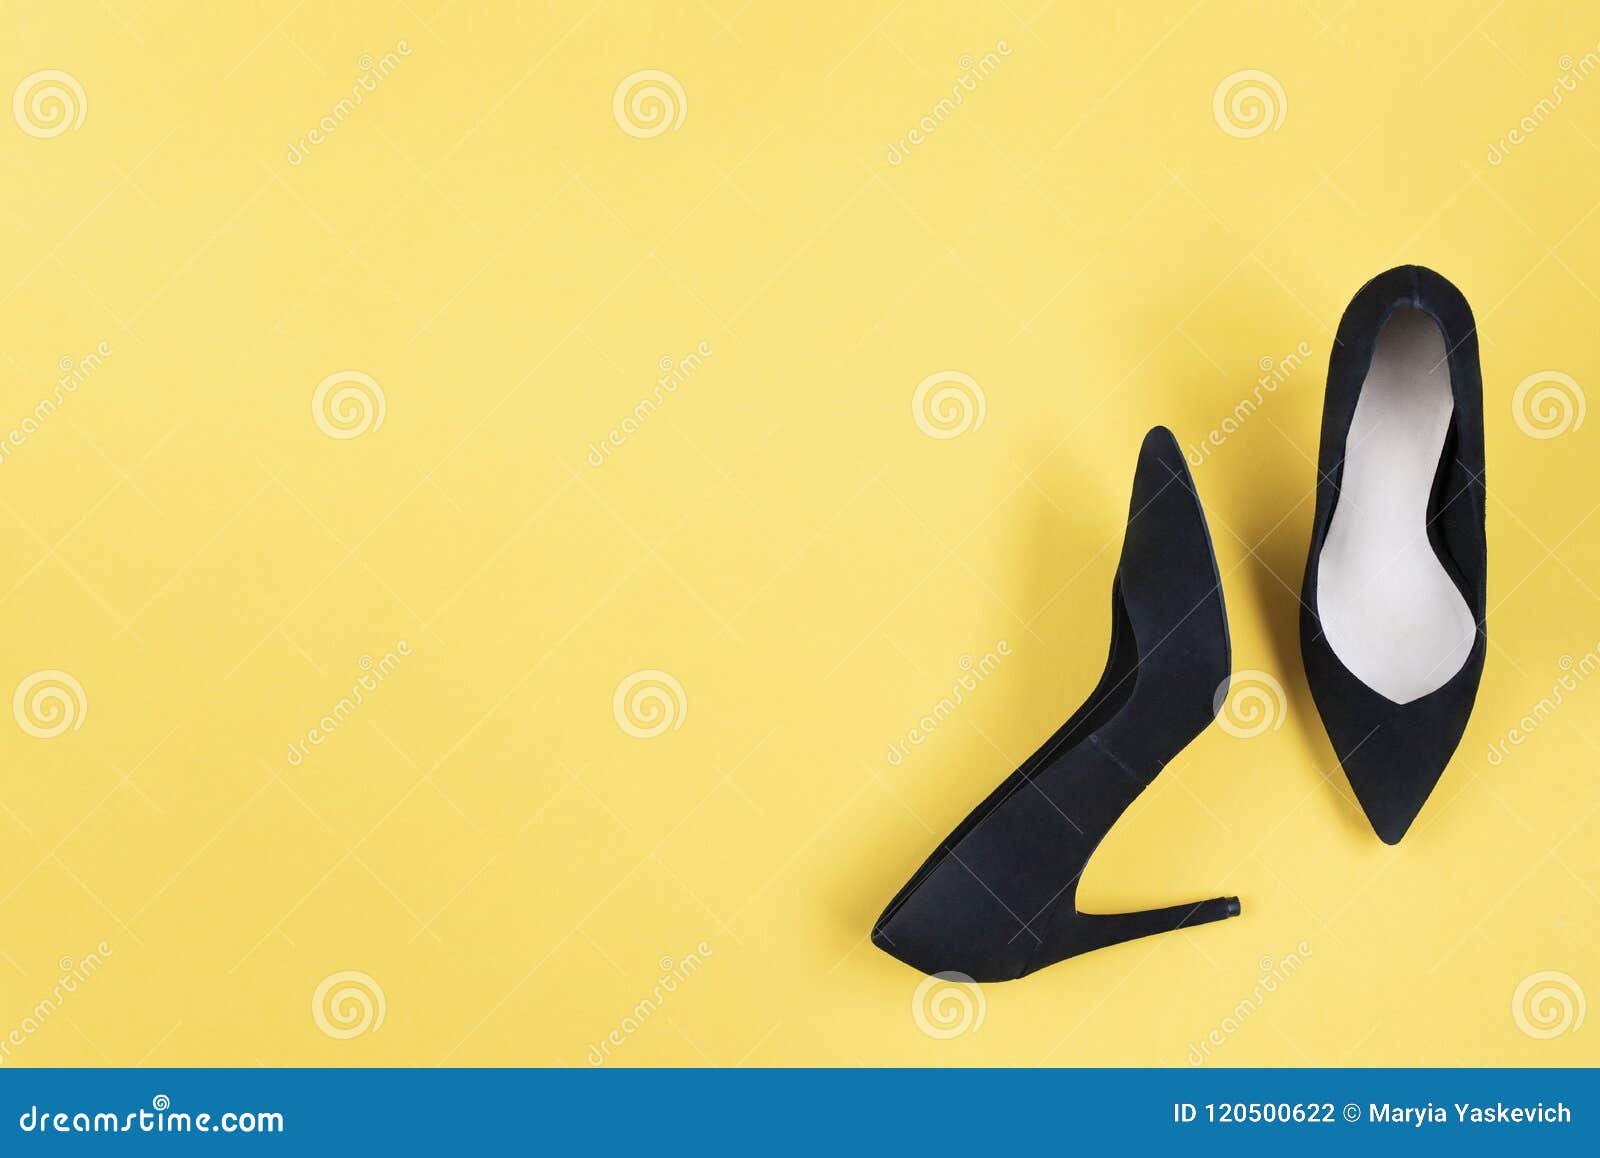 yellow and black shoes heels